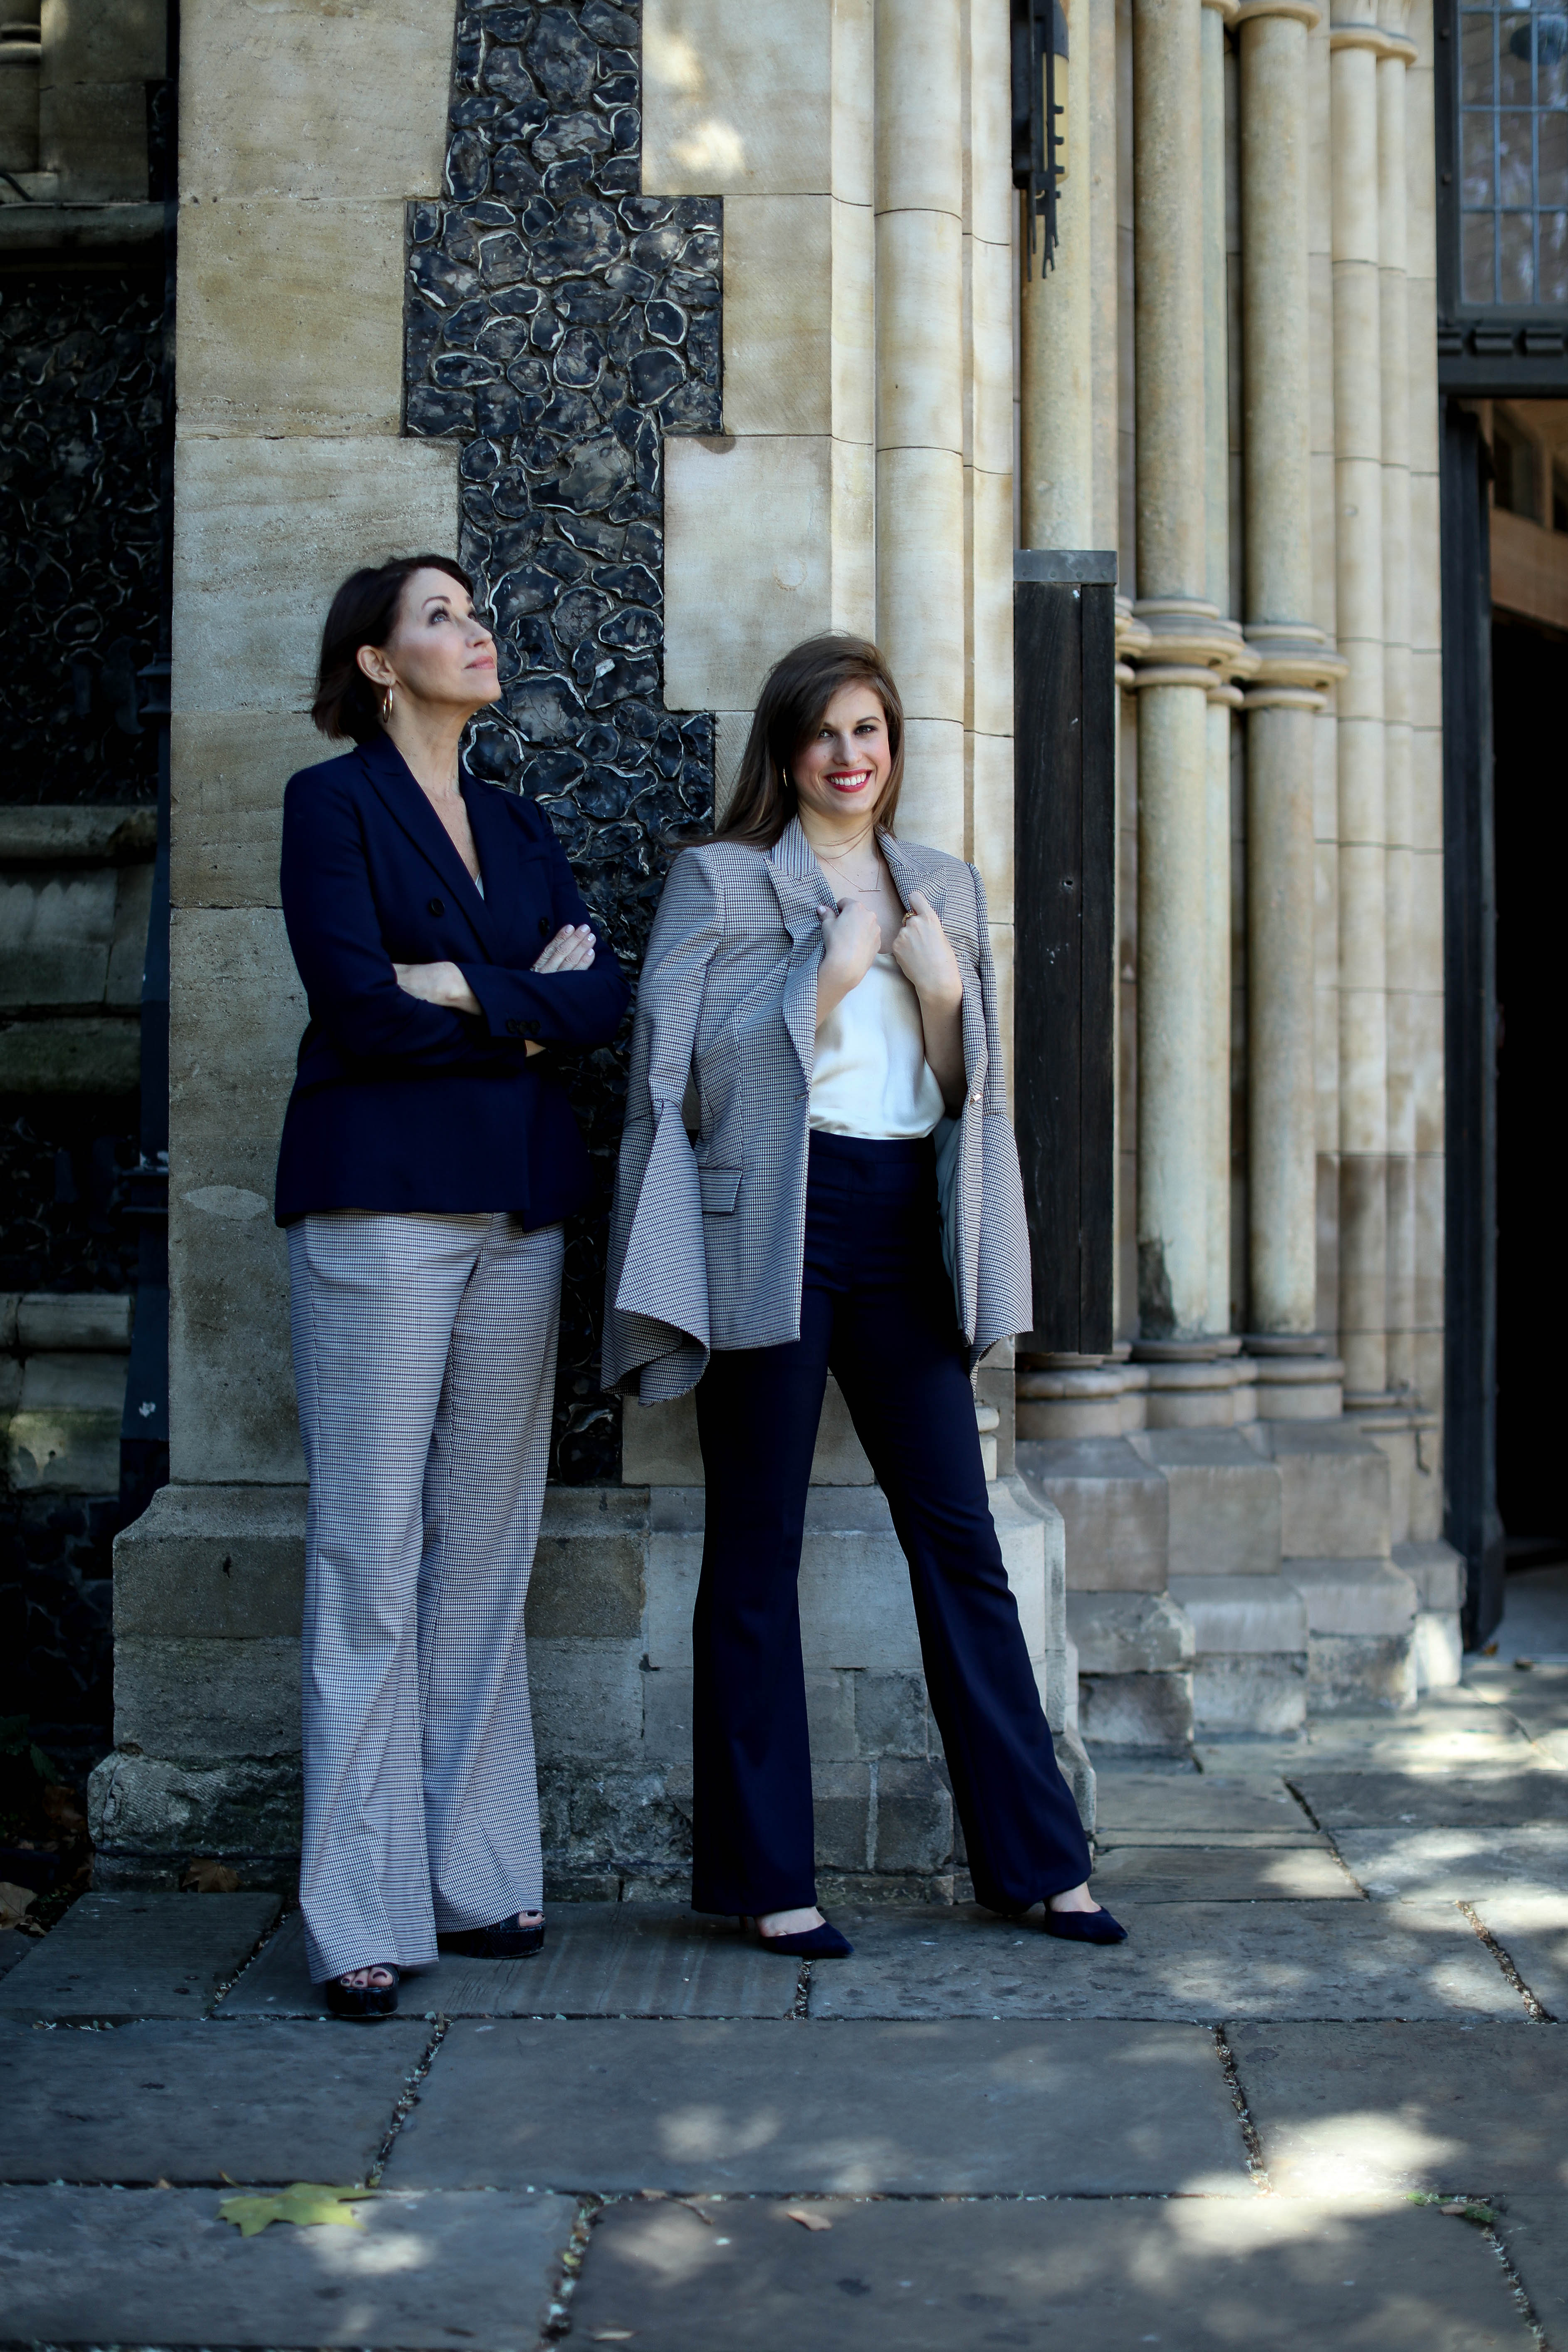 Two women standing in front of a church in london: one wearing a navy blazer & plaid pants, the other wearing a plaid blazer with a white cami and navy pants. Both in high heels and have brown hair